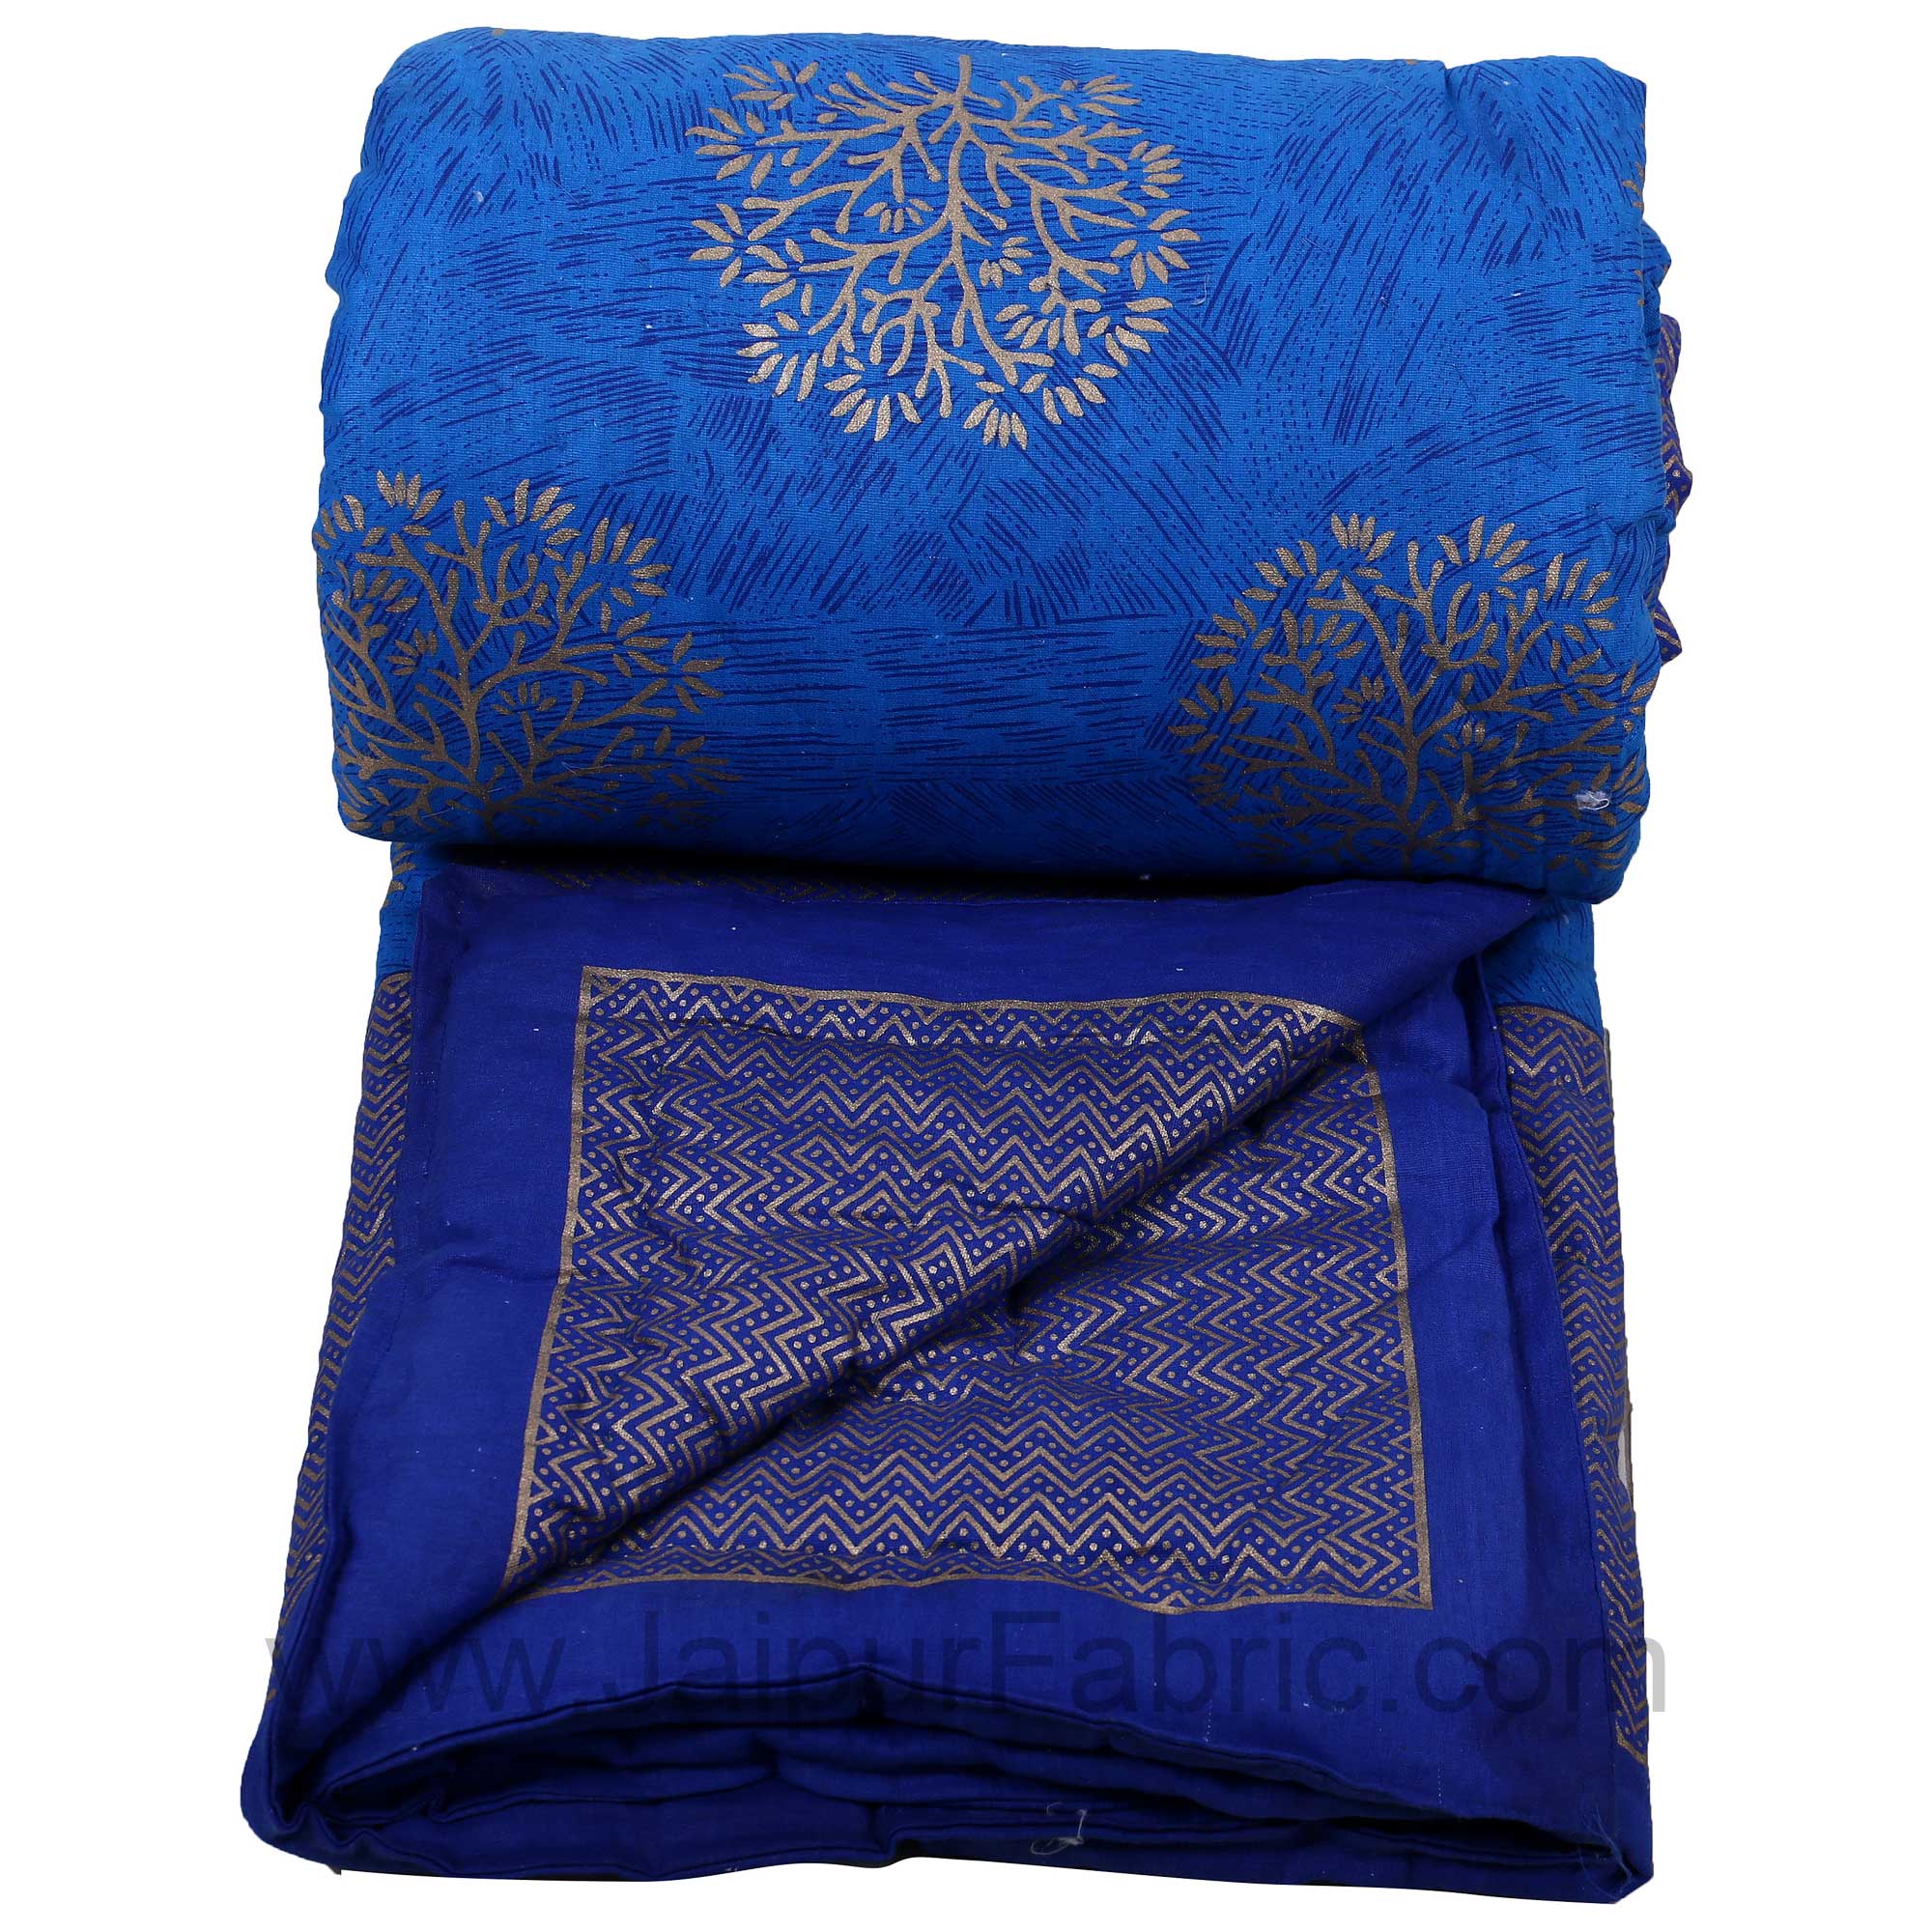 Jaipuri Printed Single Bed Razai Golden Blue And Sea Green With Leaf Pattern